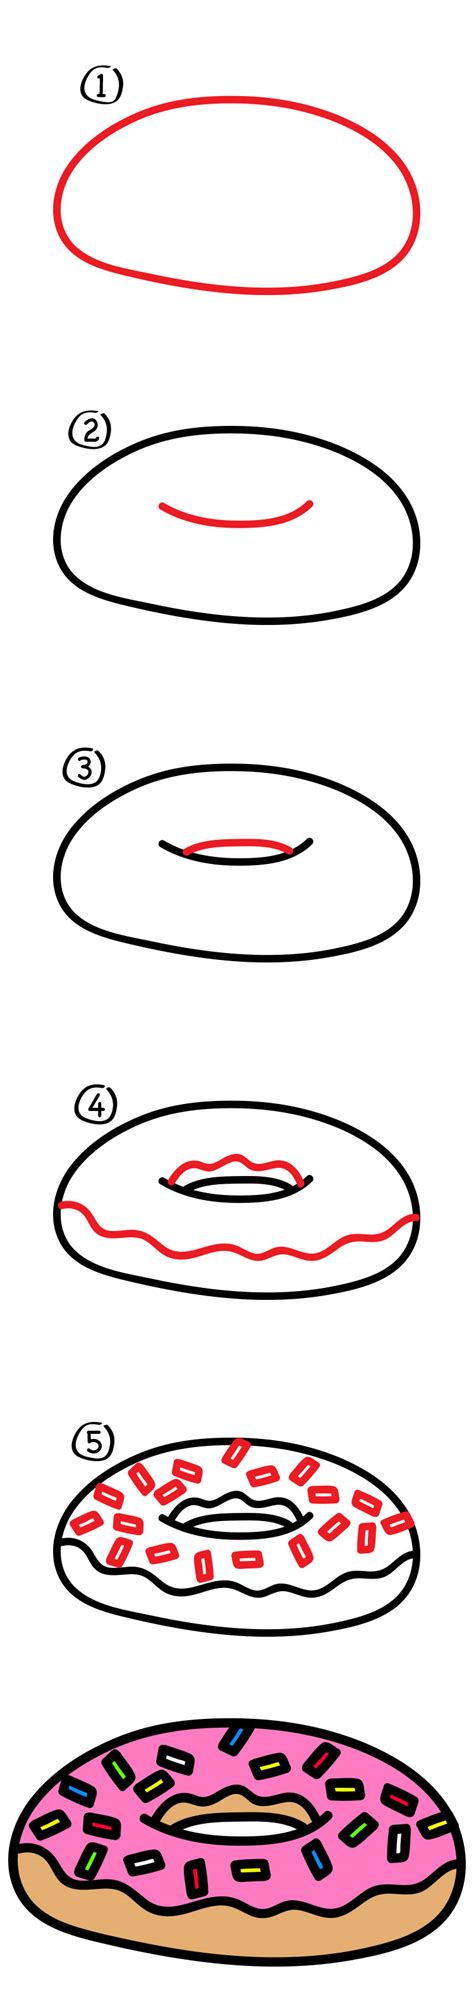 How To Draw A Donut Step By Step Easy